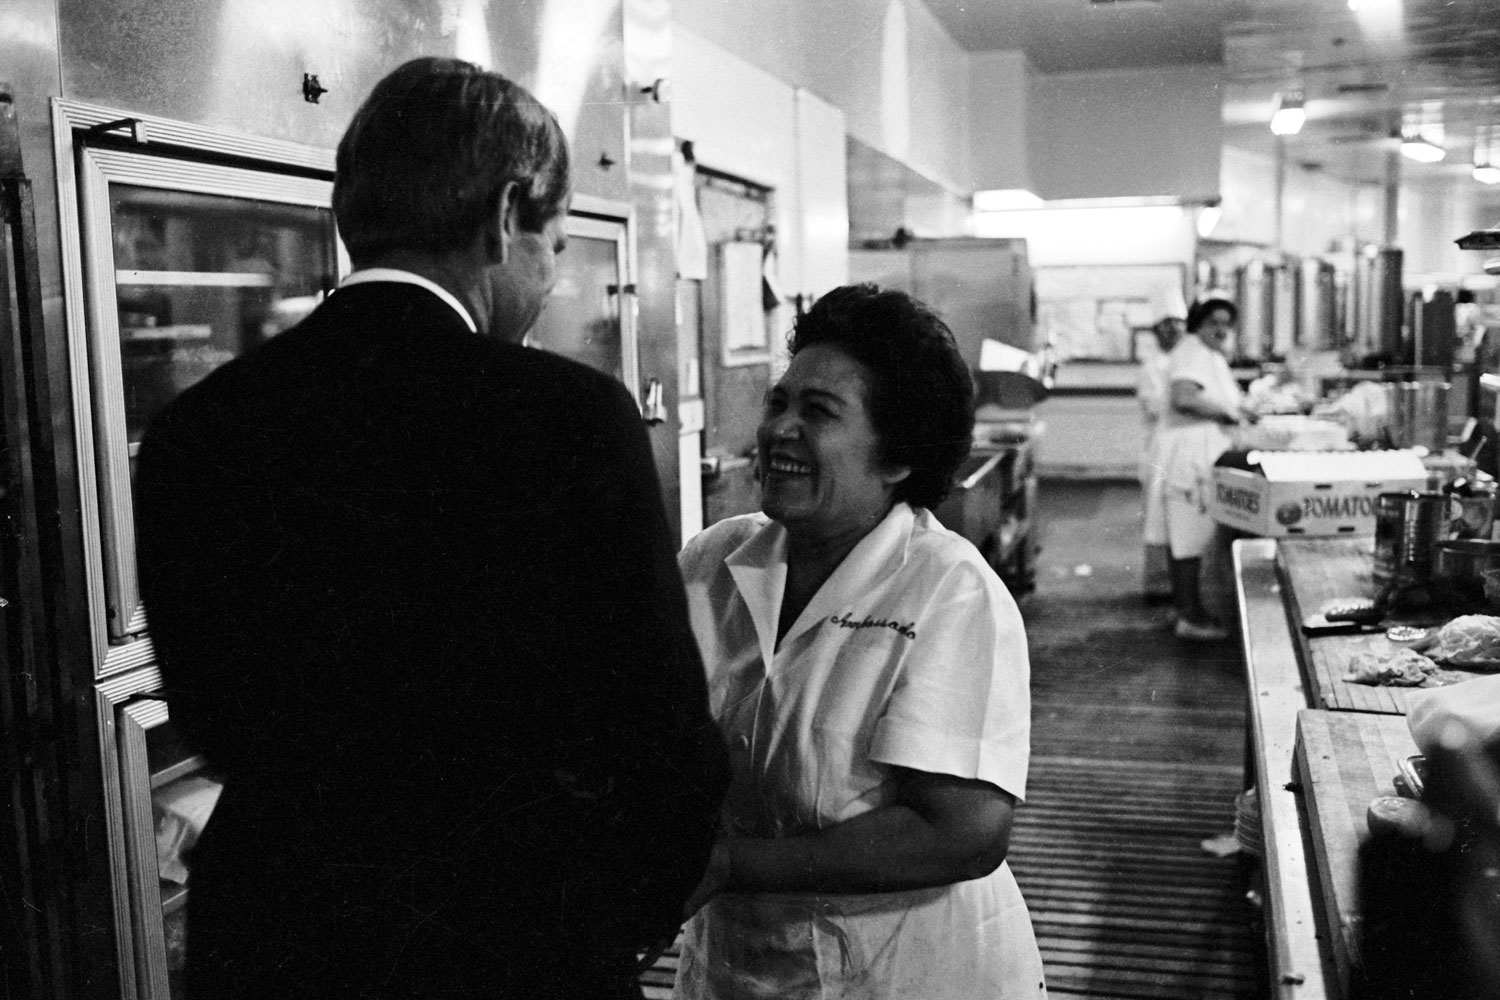 Heading for his victory speech in the Ambassador Hotel ballroom, Robert Kennedy stops in the kitchen to shake hands.